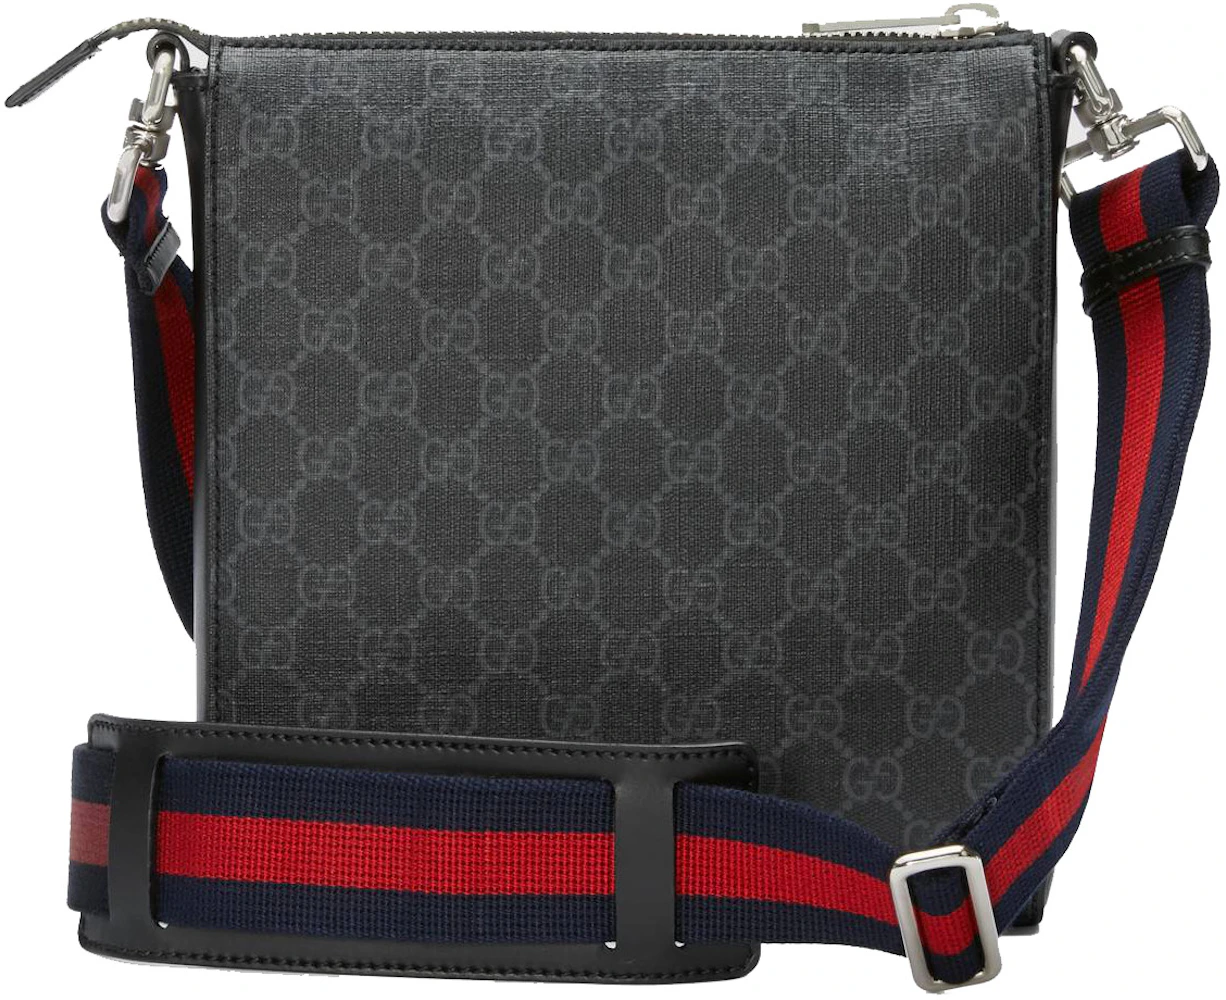 Gucci Night Courrier Messenger GG Supreme Black/Grey in Canvas with ...